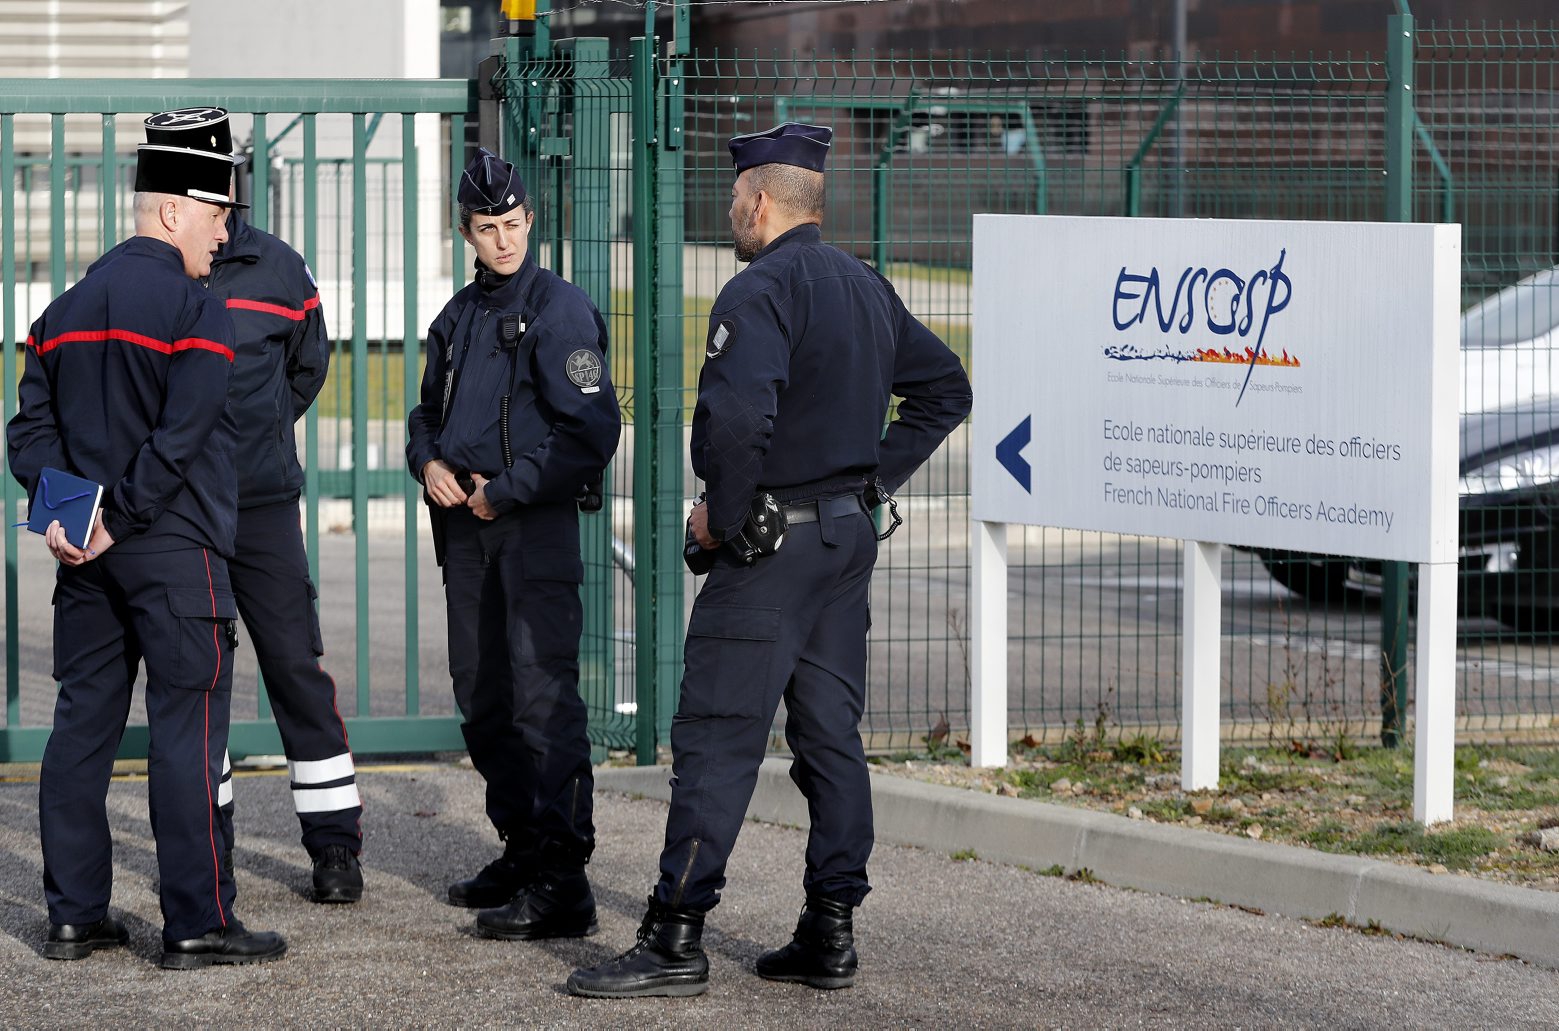 epa08187092 French police officers gather at the entrance gate of the ENSOSP (French National Fire Officers Academy) where French citizens will be quarantined after their repatriation from Wuhan area, in Aix-en-Provence, near Marseille, France, 02 February 2020. Six cases of the Wuhan coronavirus have been identified in France, the Health Ministry announced on 30 January. The coronavirus, called 2019-nCoV, originating from Wuhan, China, has spread to all the 31 provinces of China as well as more than a dozen countries in the world. The outbreak of coronavirus has so far claimed 304 lives and infected more than 14,000 others, according to latest media reports.  EPA/SEBASTIEN NOGIER FRANCE HEALTH CORONAVIRUS